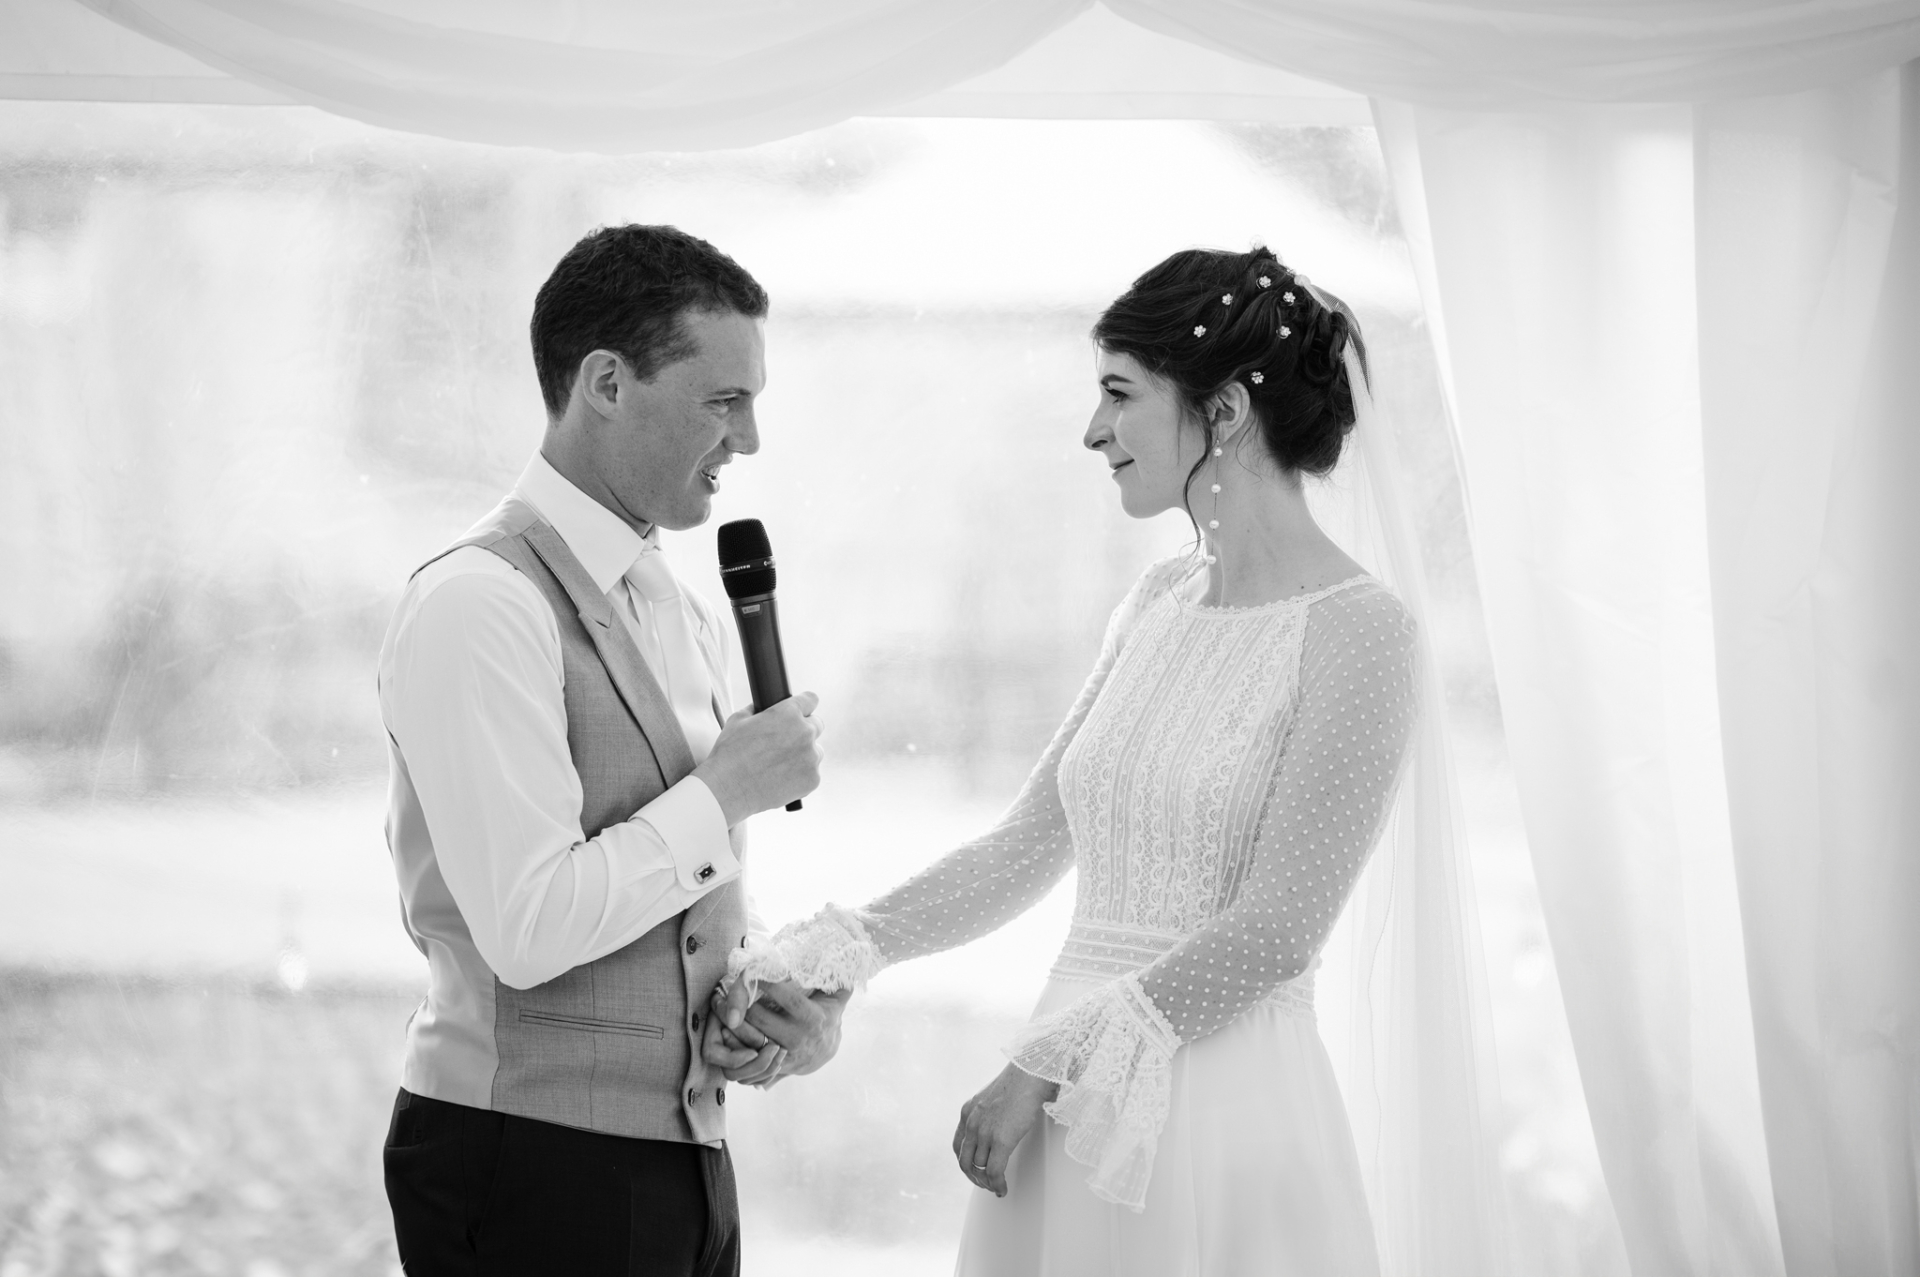 Groom holding the bride's hand as he speaks directly to her during their joint speech